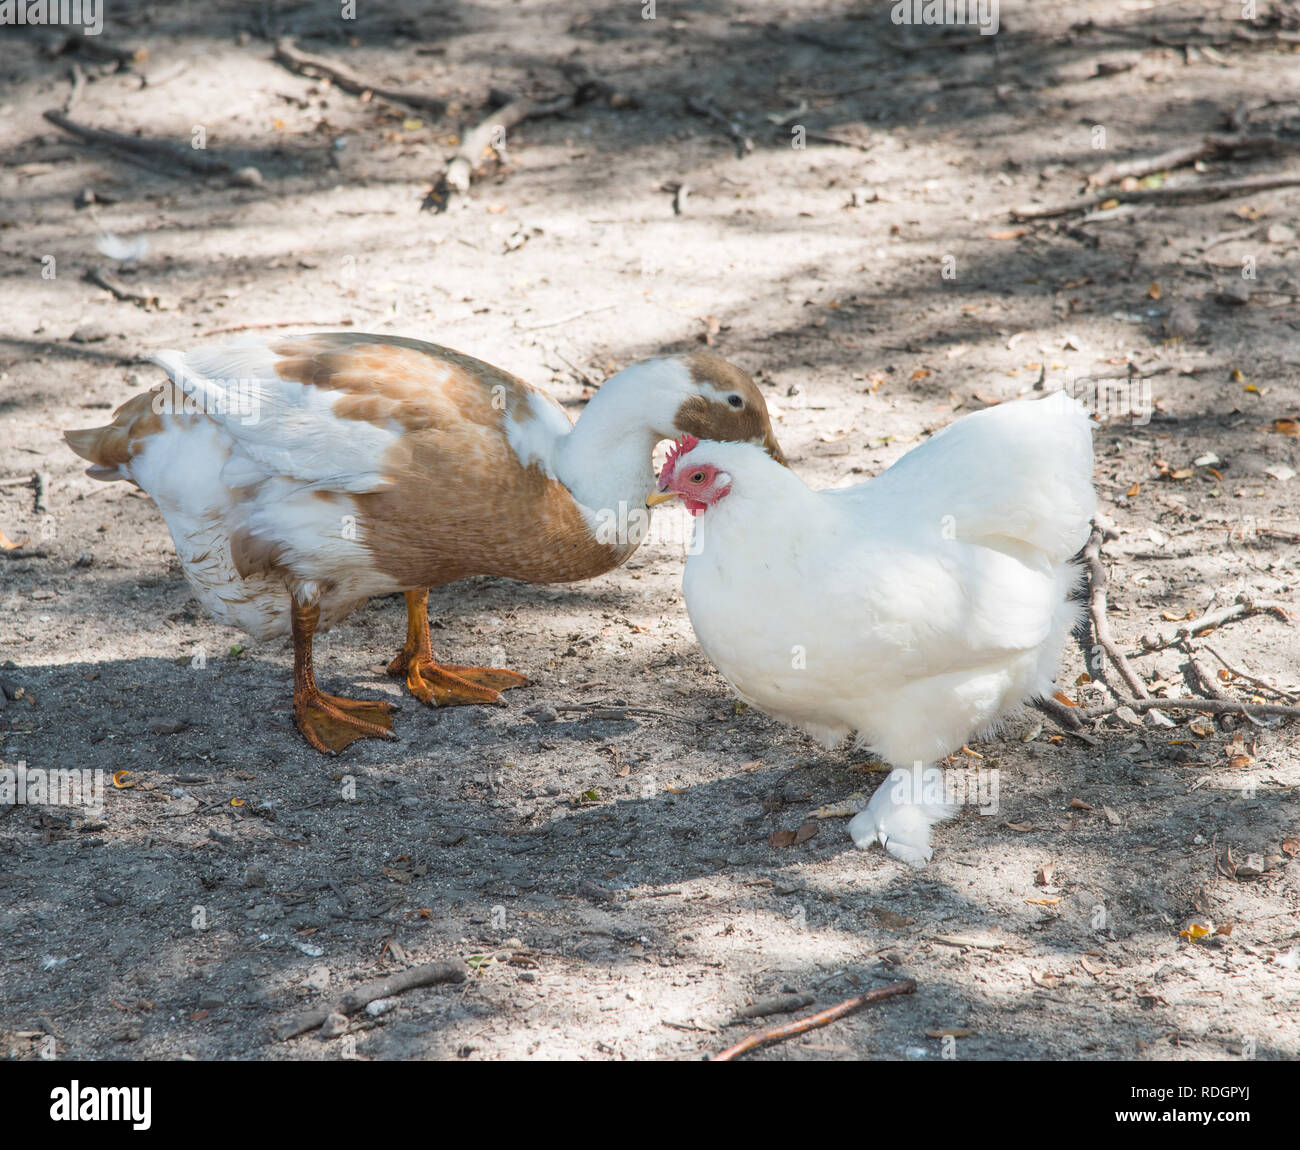 White chicken with feathered feet and two-tone duck roaming free in outdoor farm setting in Illinois. Stock Photo